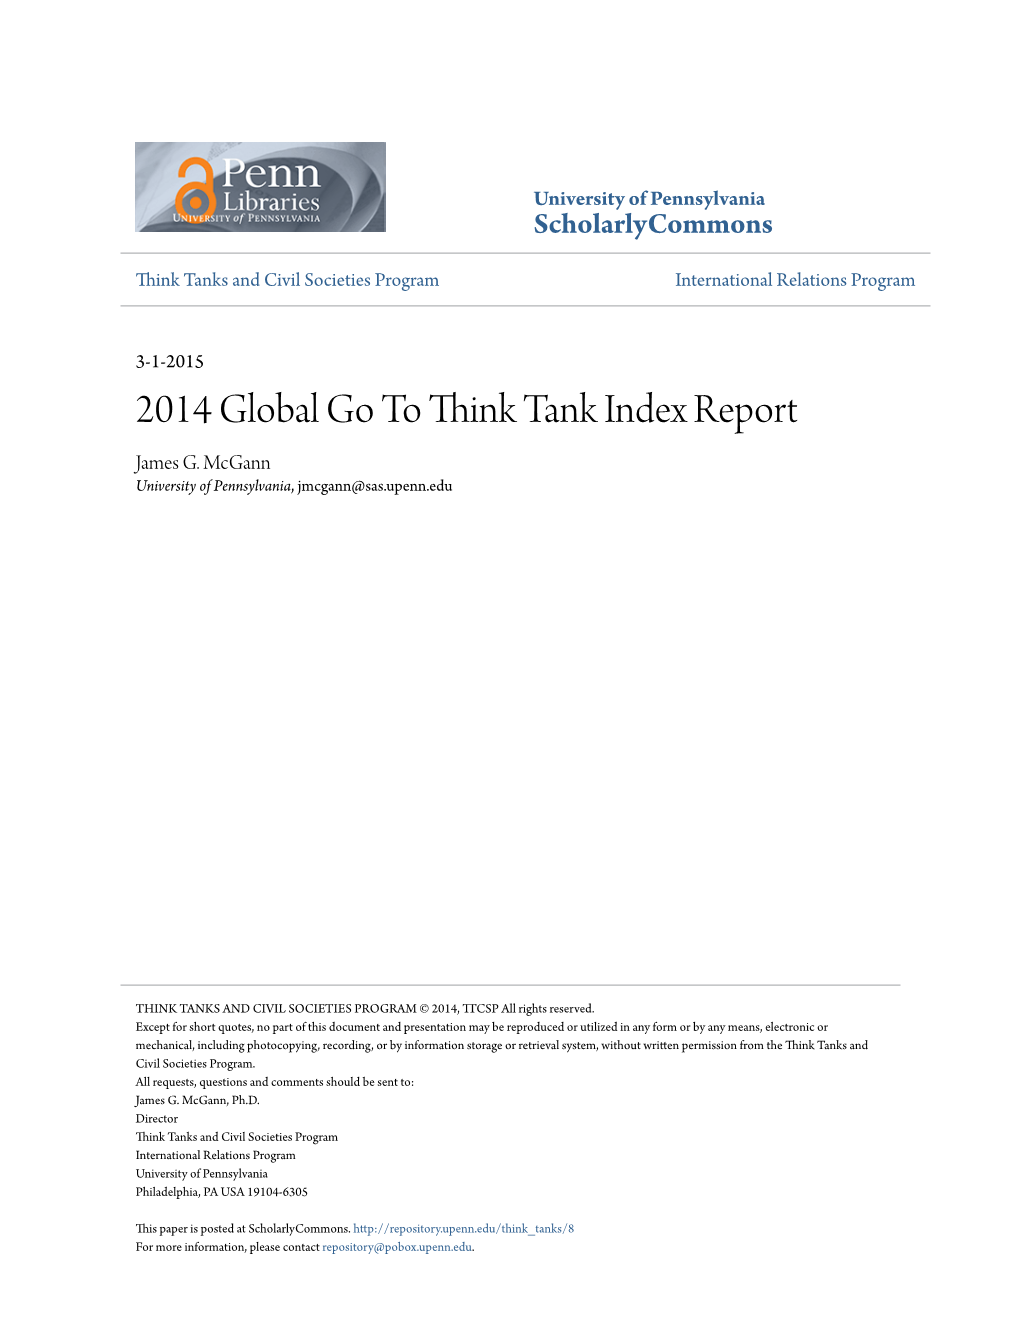 2014 Global Go to Think Tank Index Report